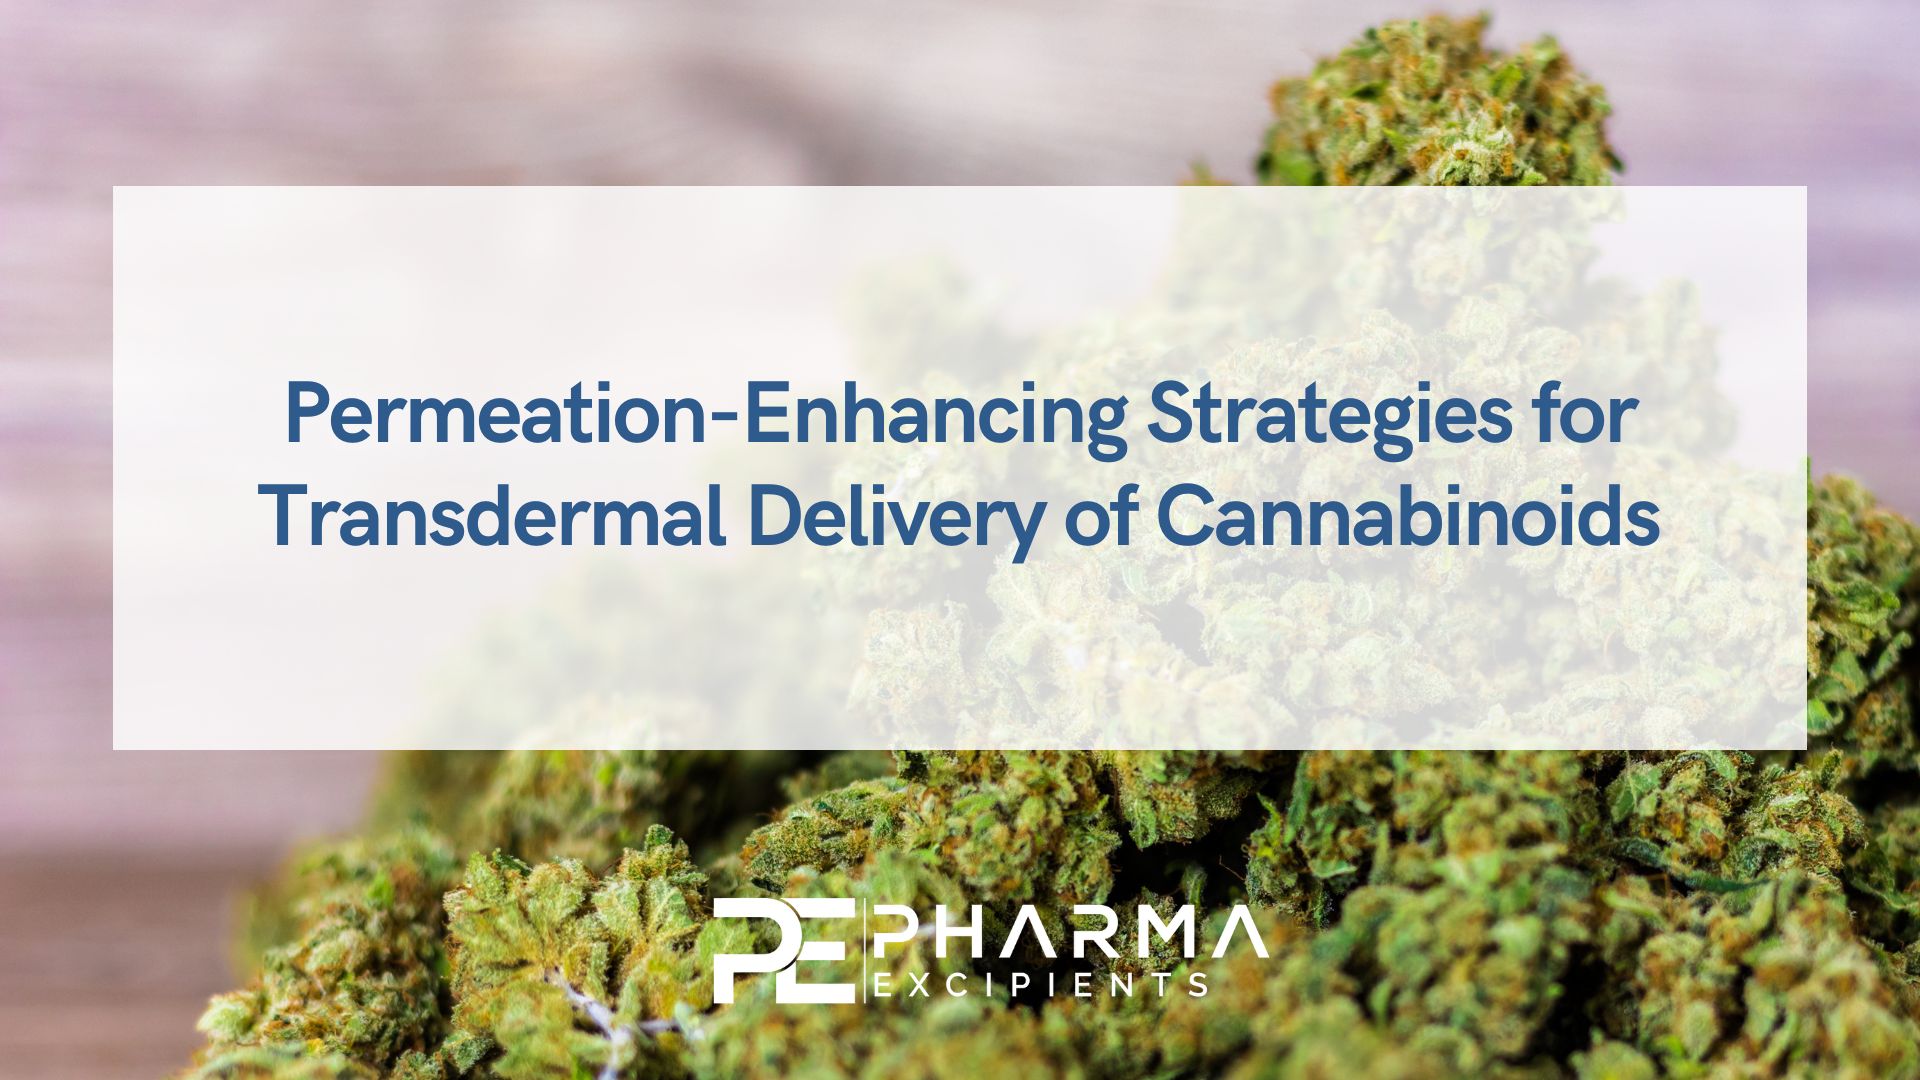 Permeation-Enhancing Strategies for Transdermal Delivery of Cannabinoids